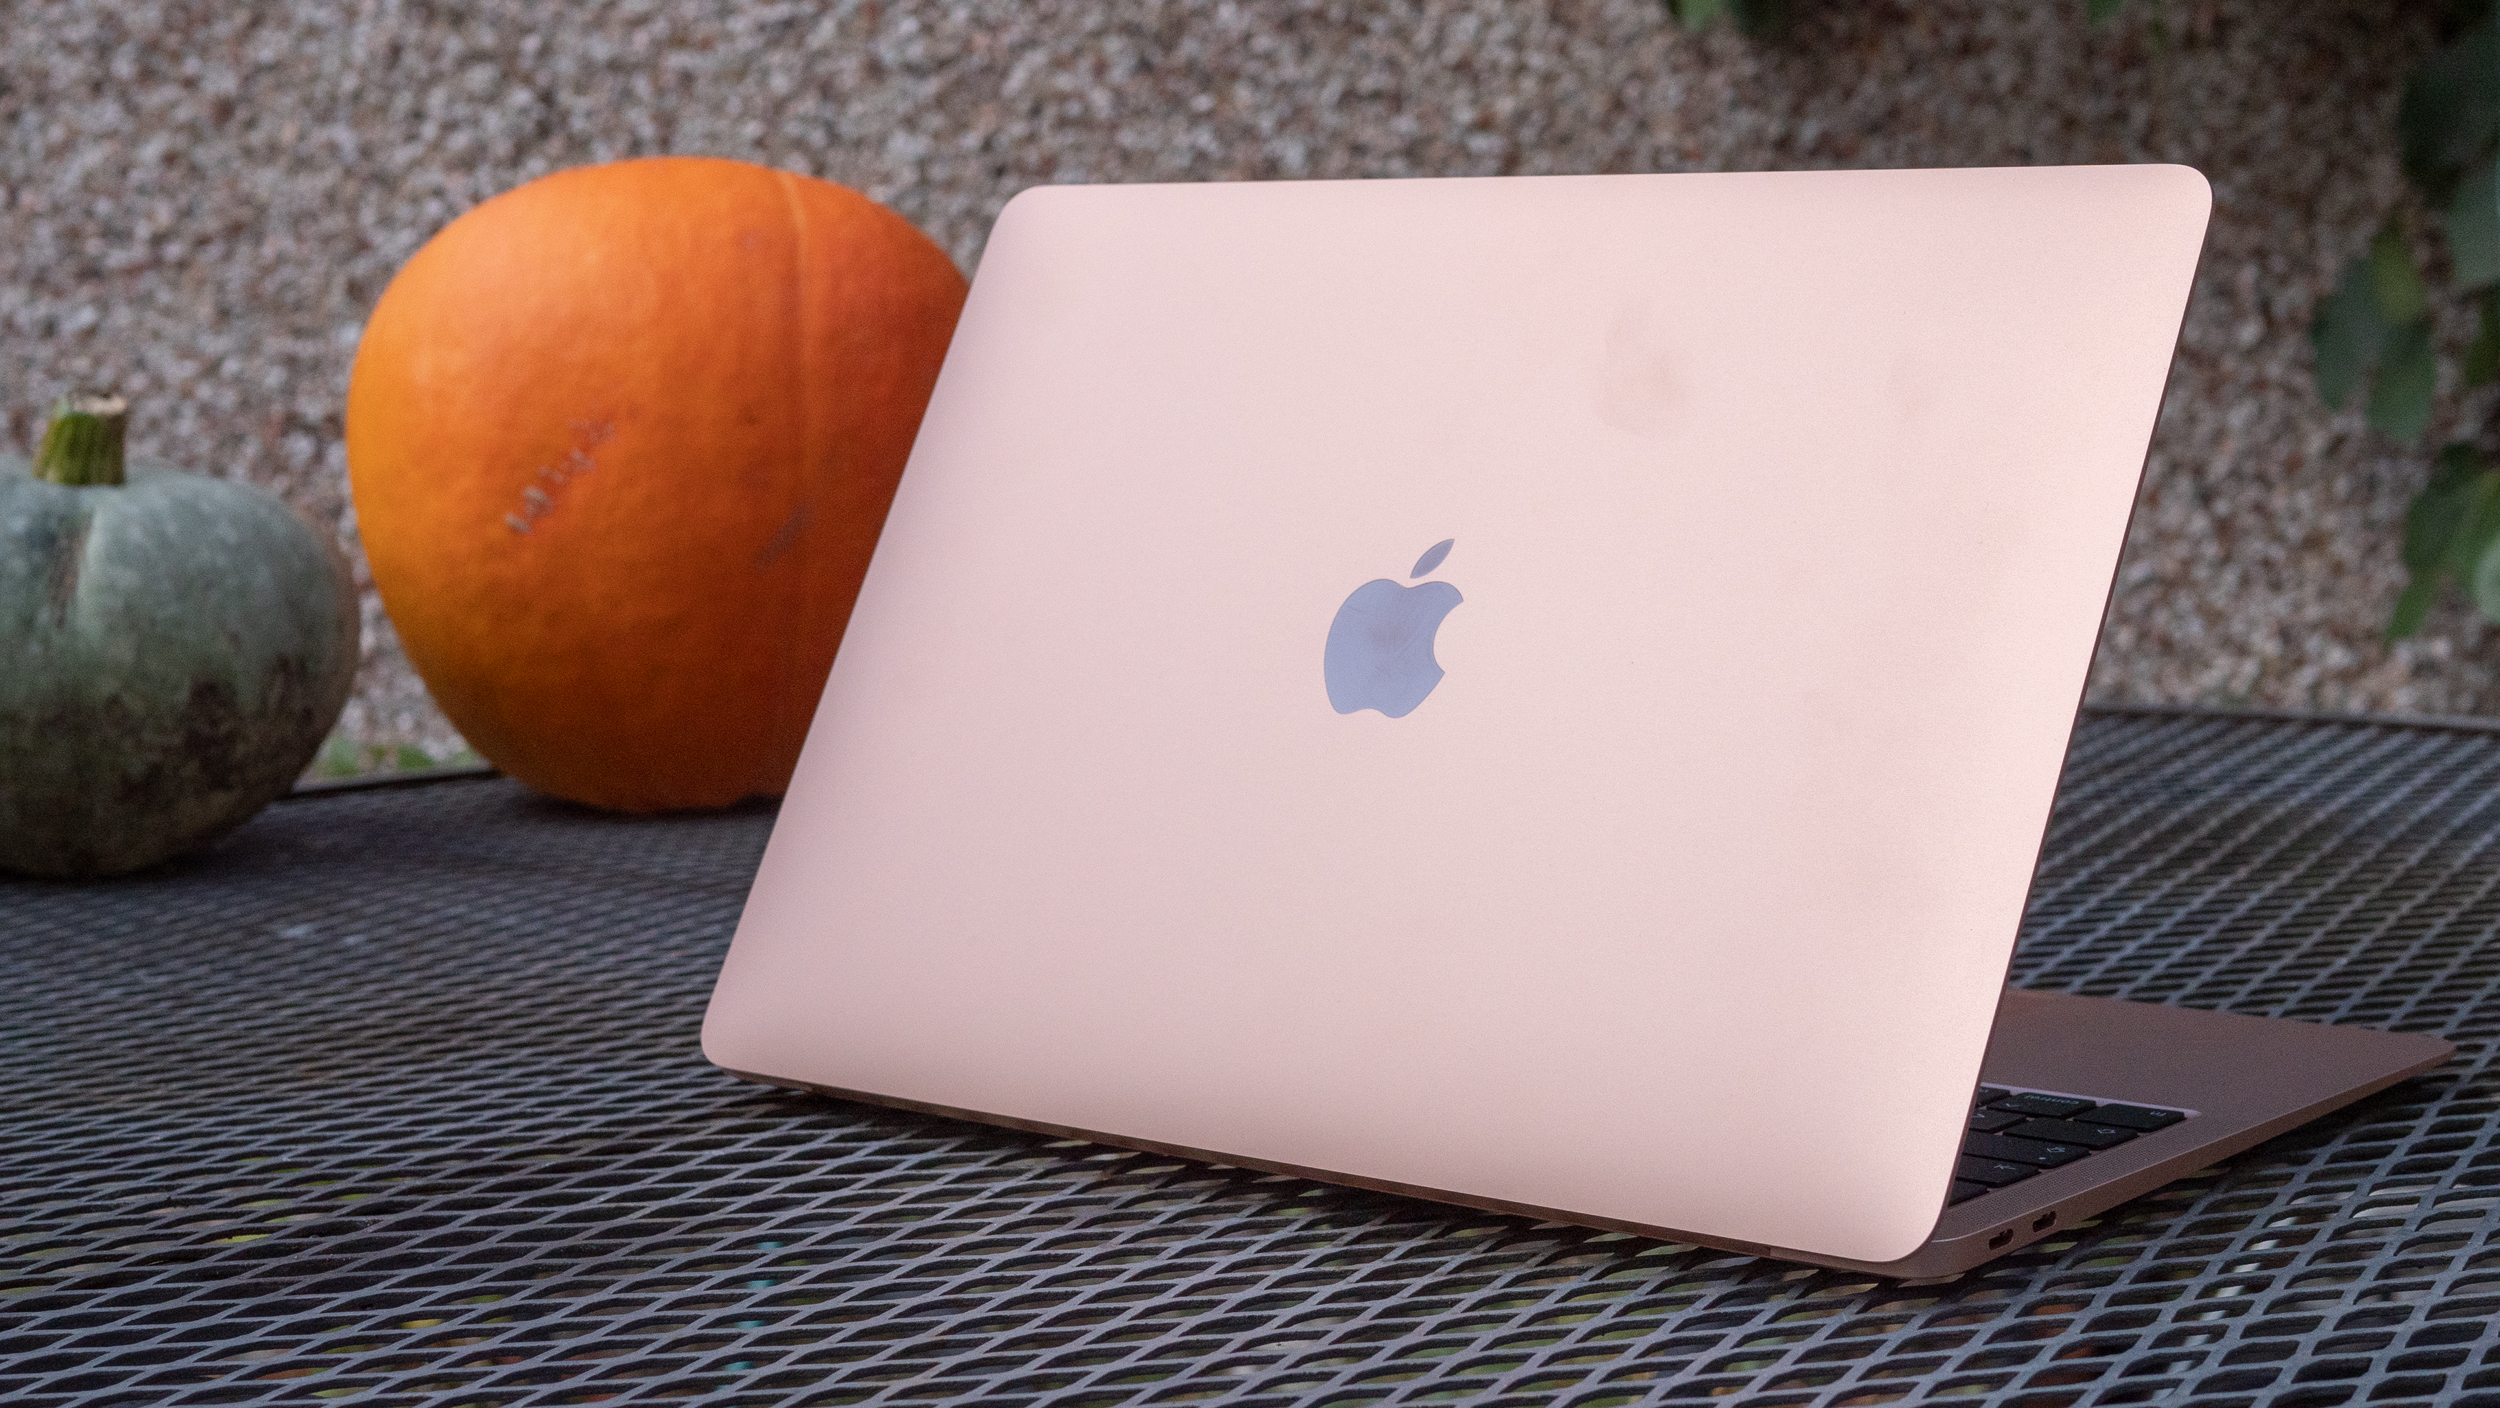 Apple MacBook Air (Apple M1, 2020) review: The world's best